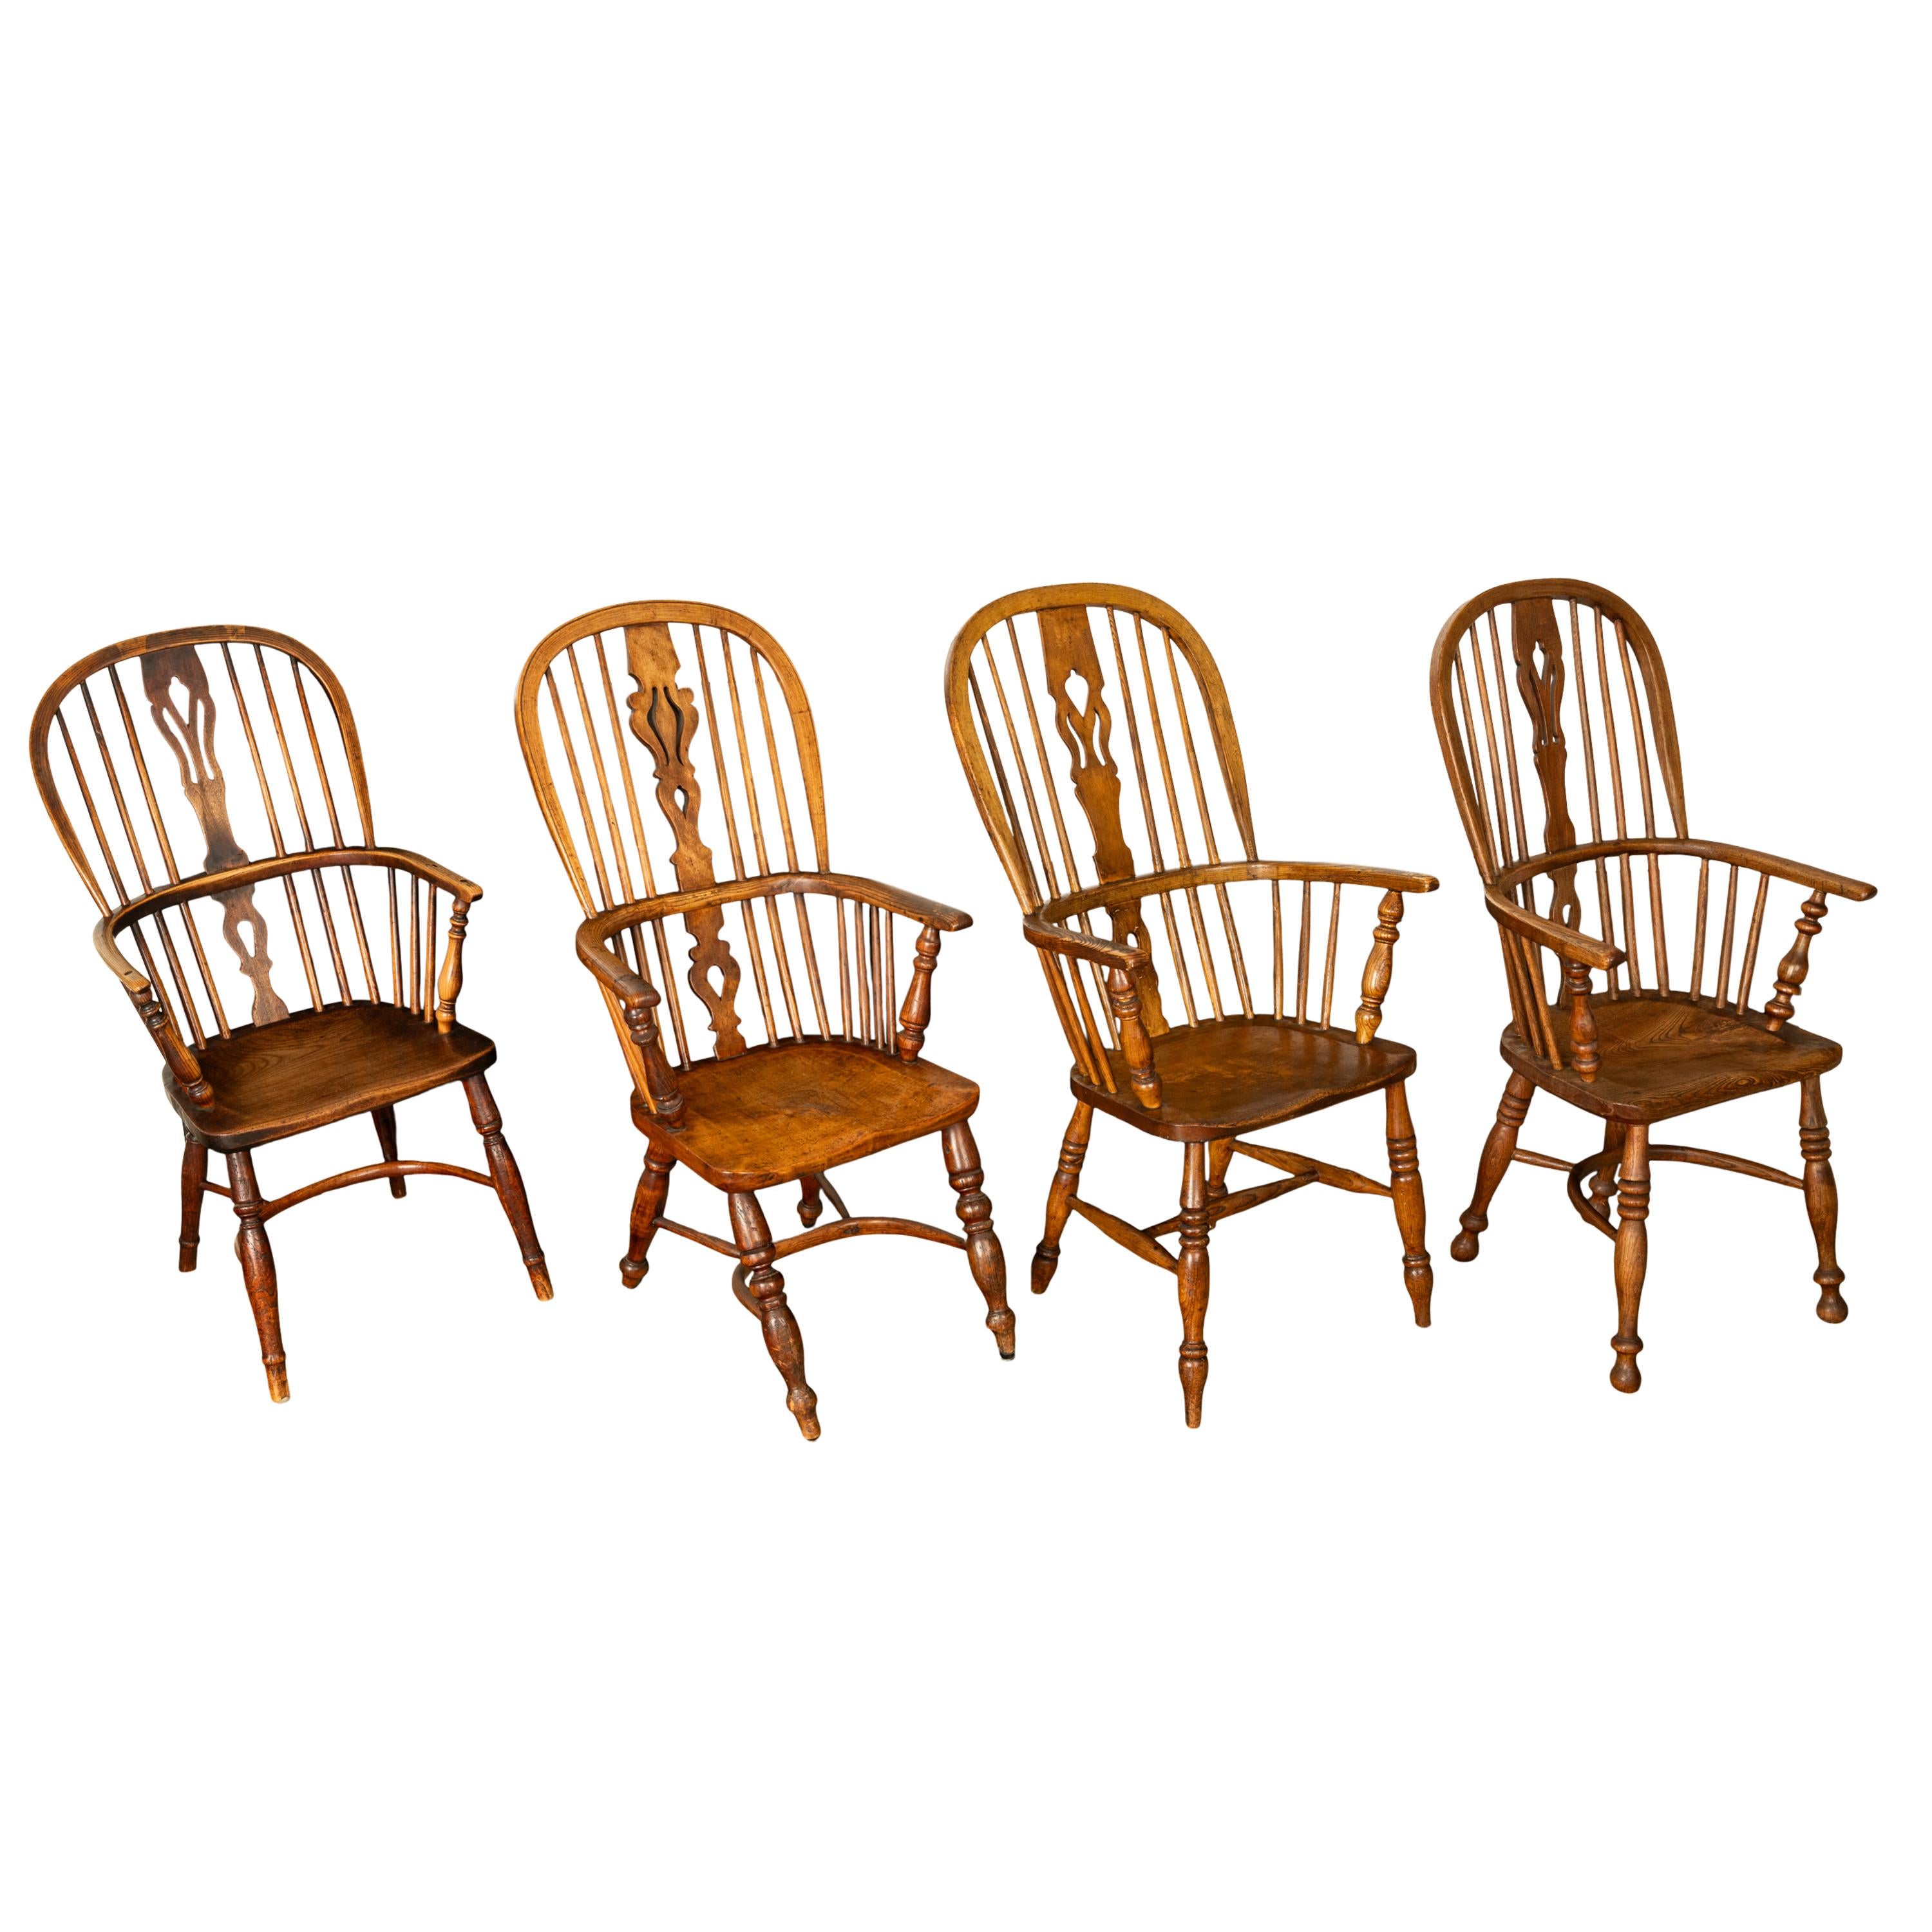 Turned Set 4 Antique 19thC High-backed English Ash Elm Country Windsor Arm Chairs 1840  For Sale